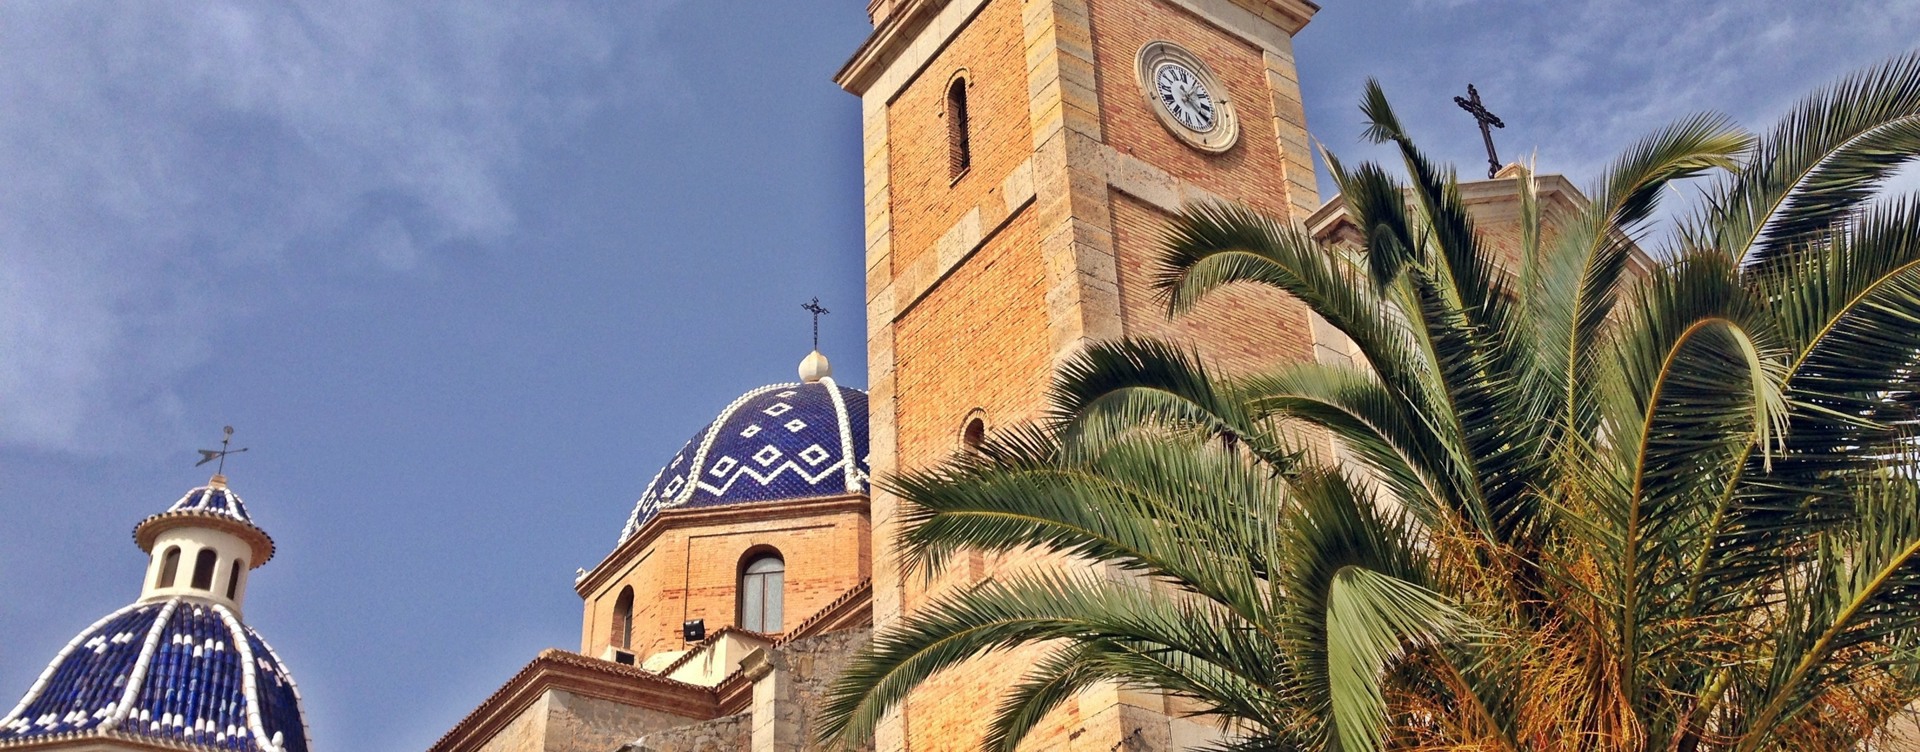 Discover the charming village of Altea
during your holiday on the Costa Blanca